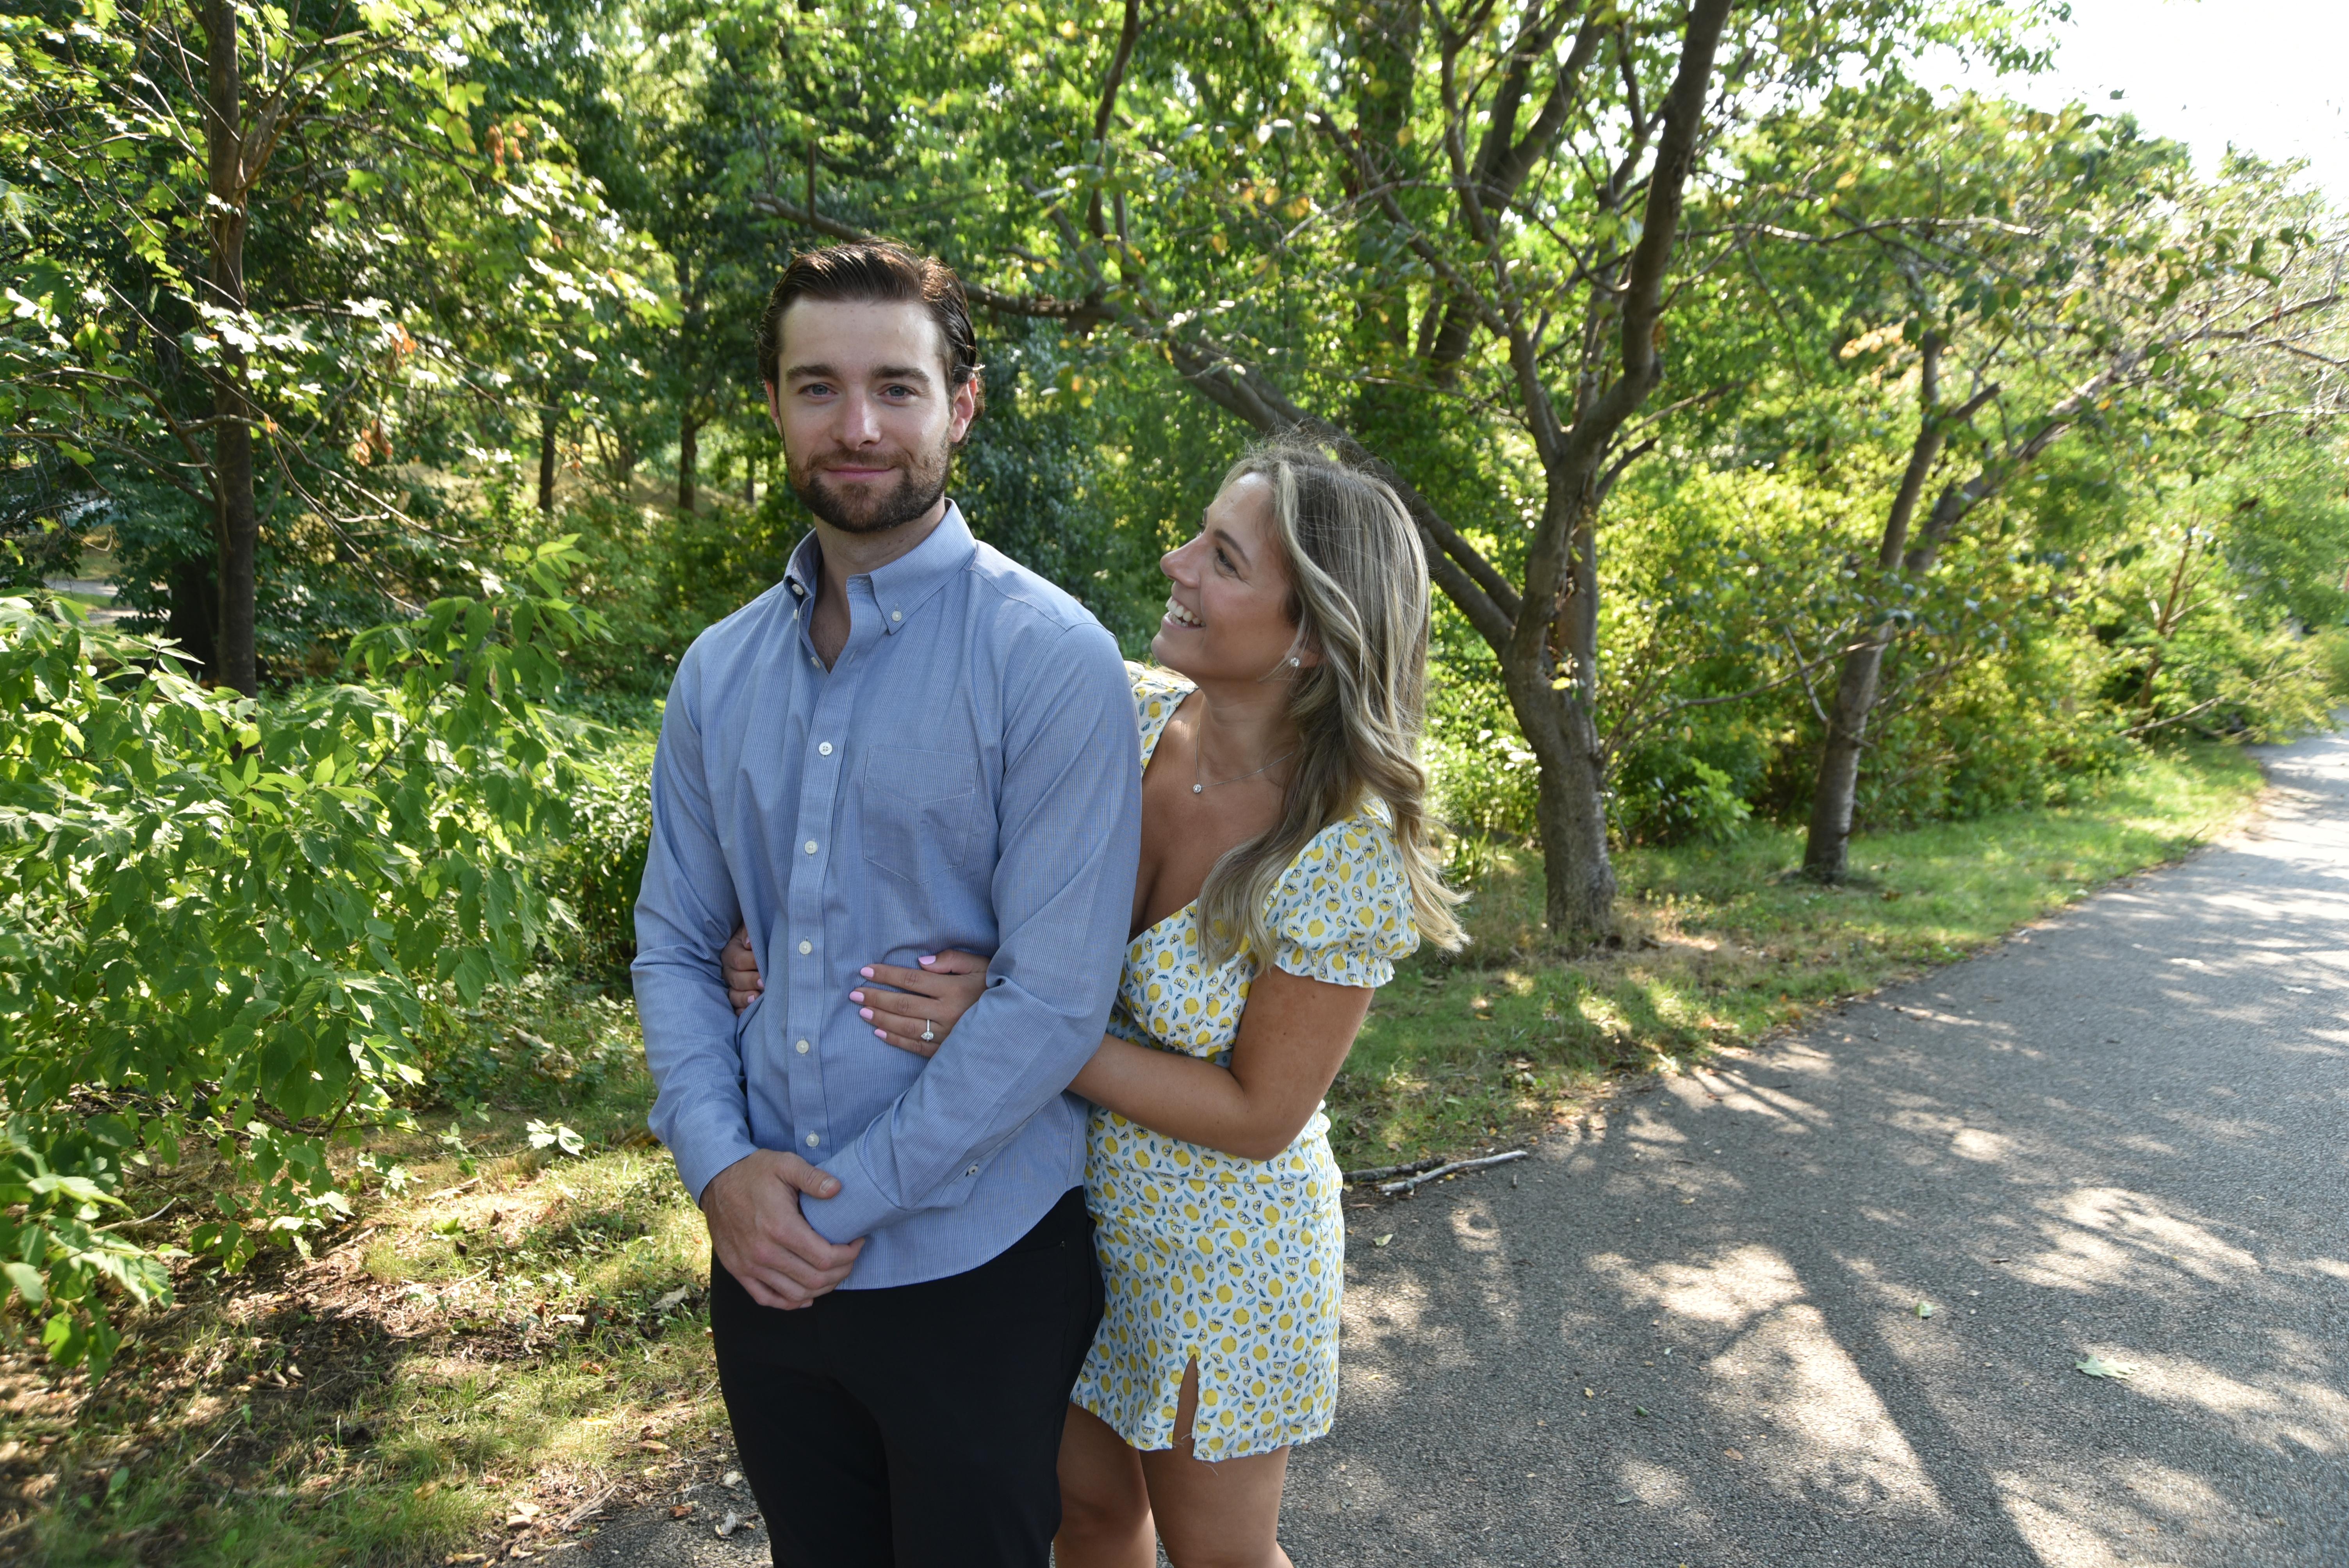 The Wedding Website of Ali Chaitin and Sam Cook